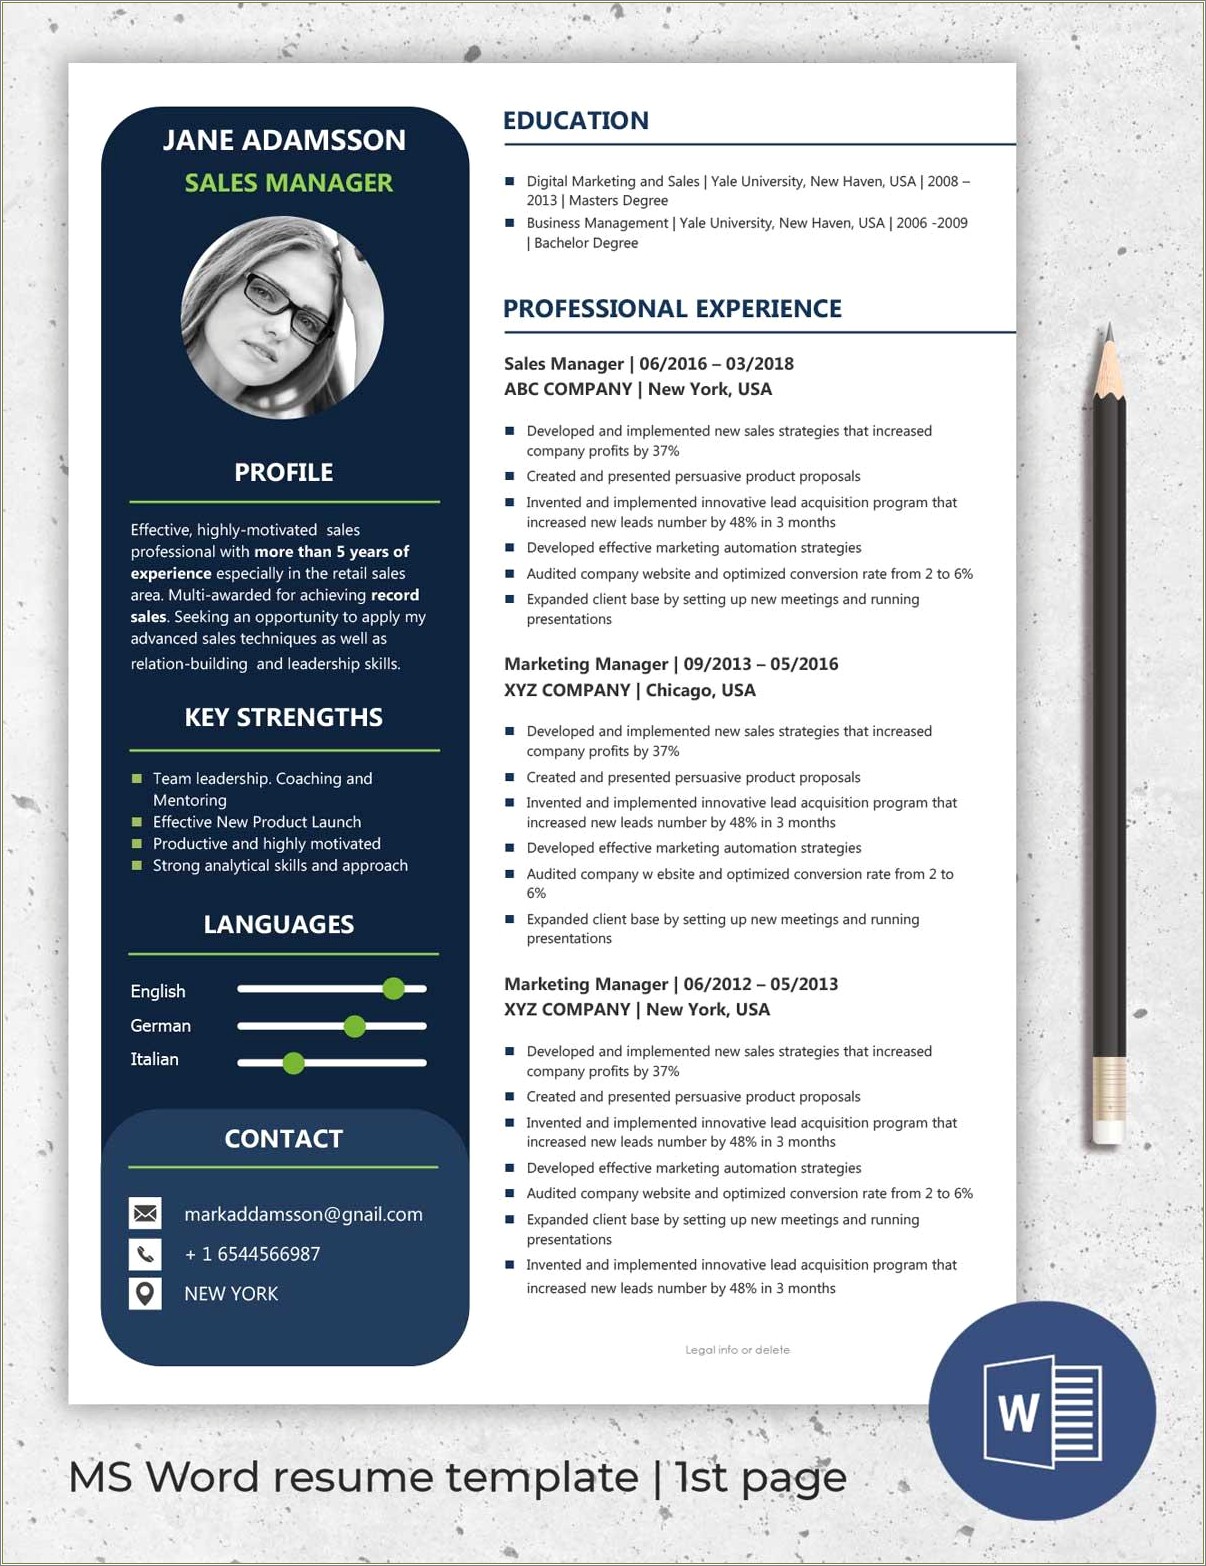 Education Techniques Skills In Resume For Masters